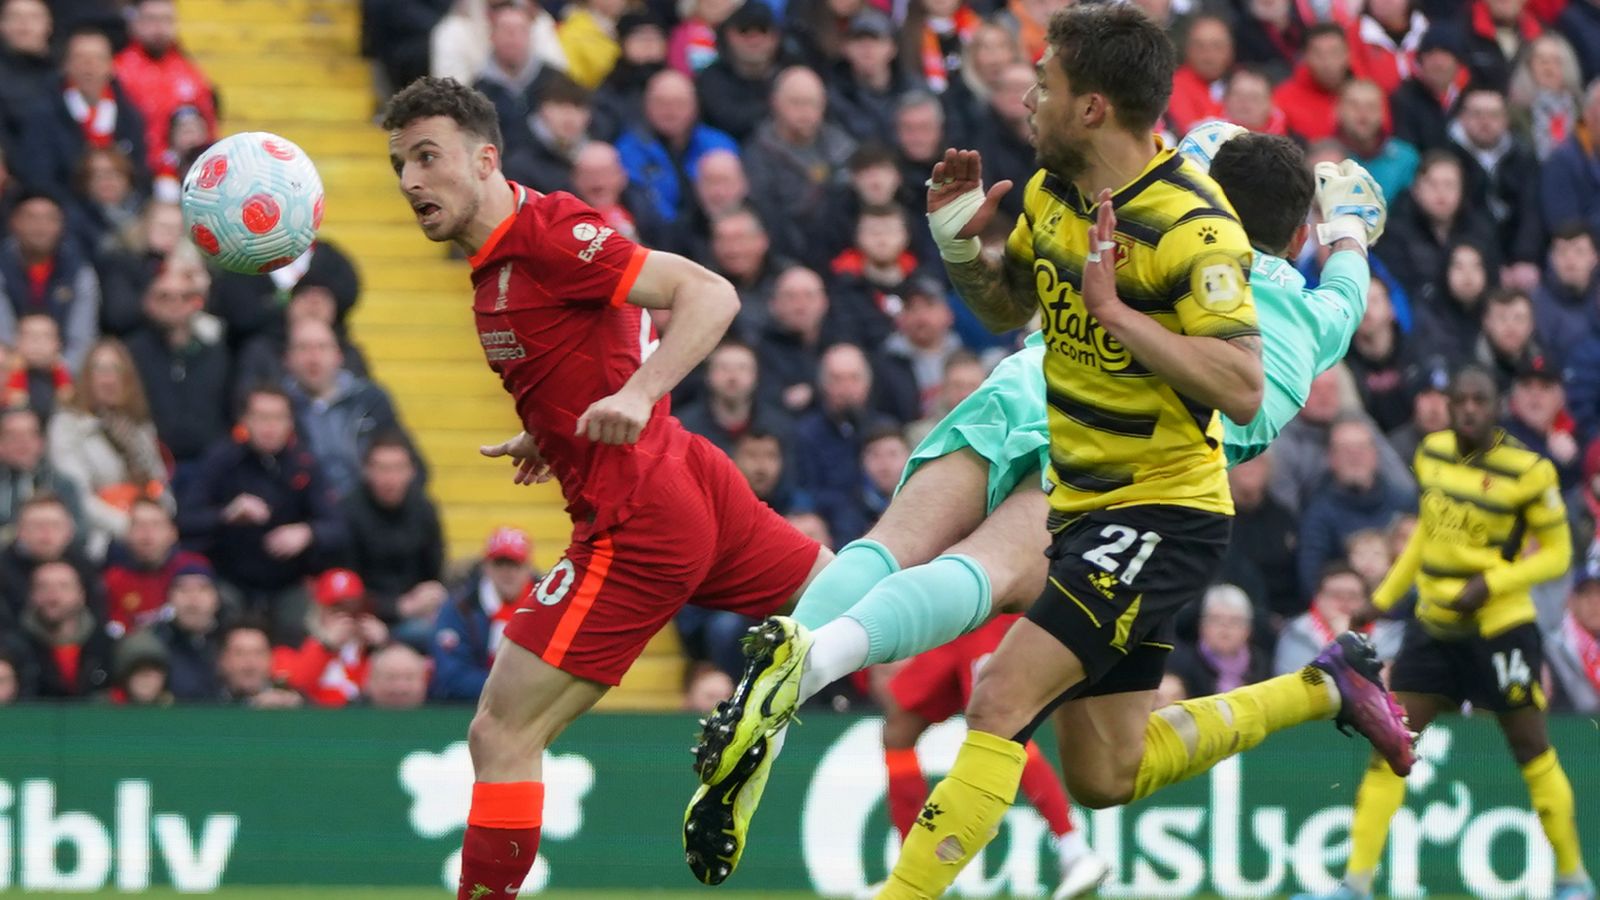 Premier League: Dennis In Action; Troost-Ekong, Etebo, Kalu Missing As Watford Fall To Liverpool